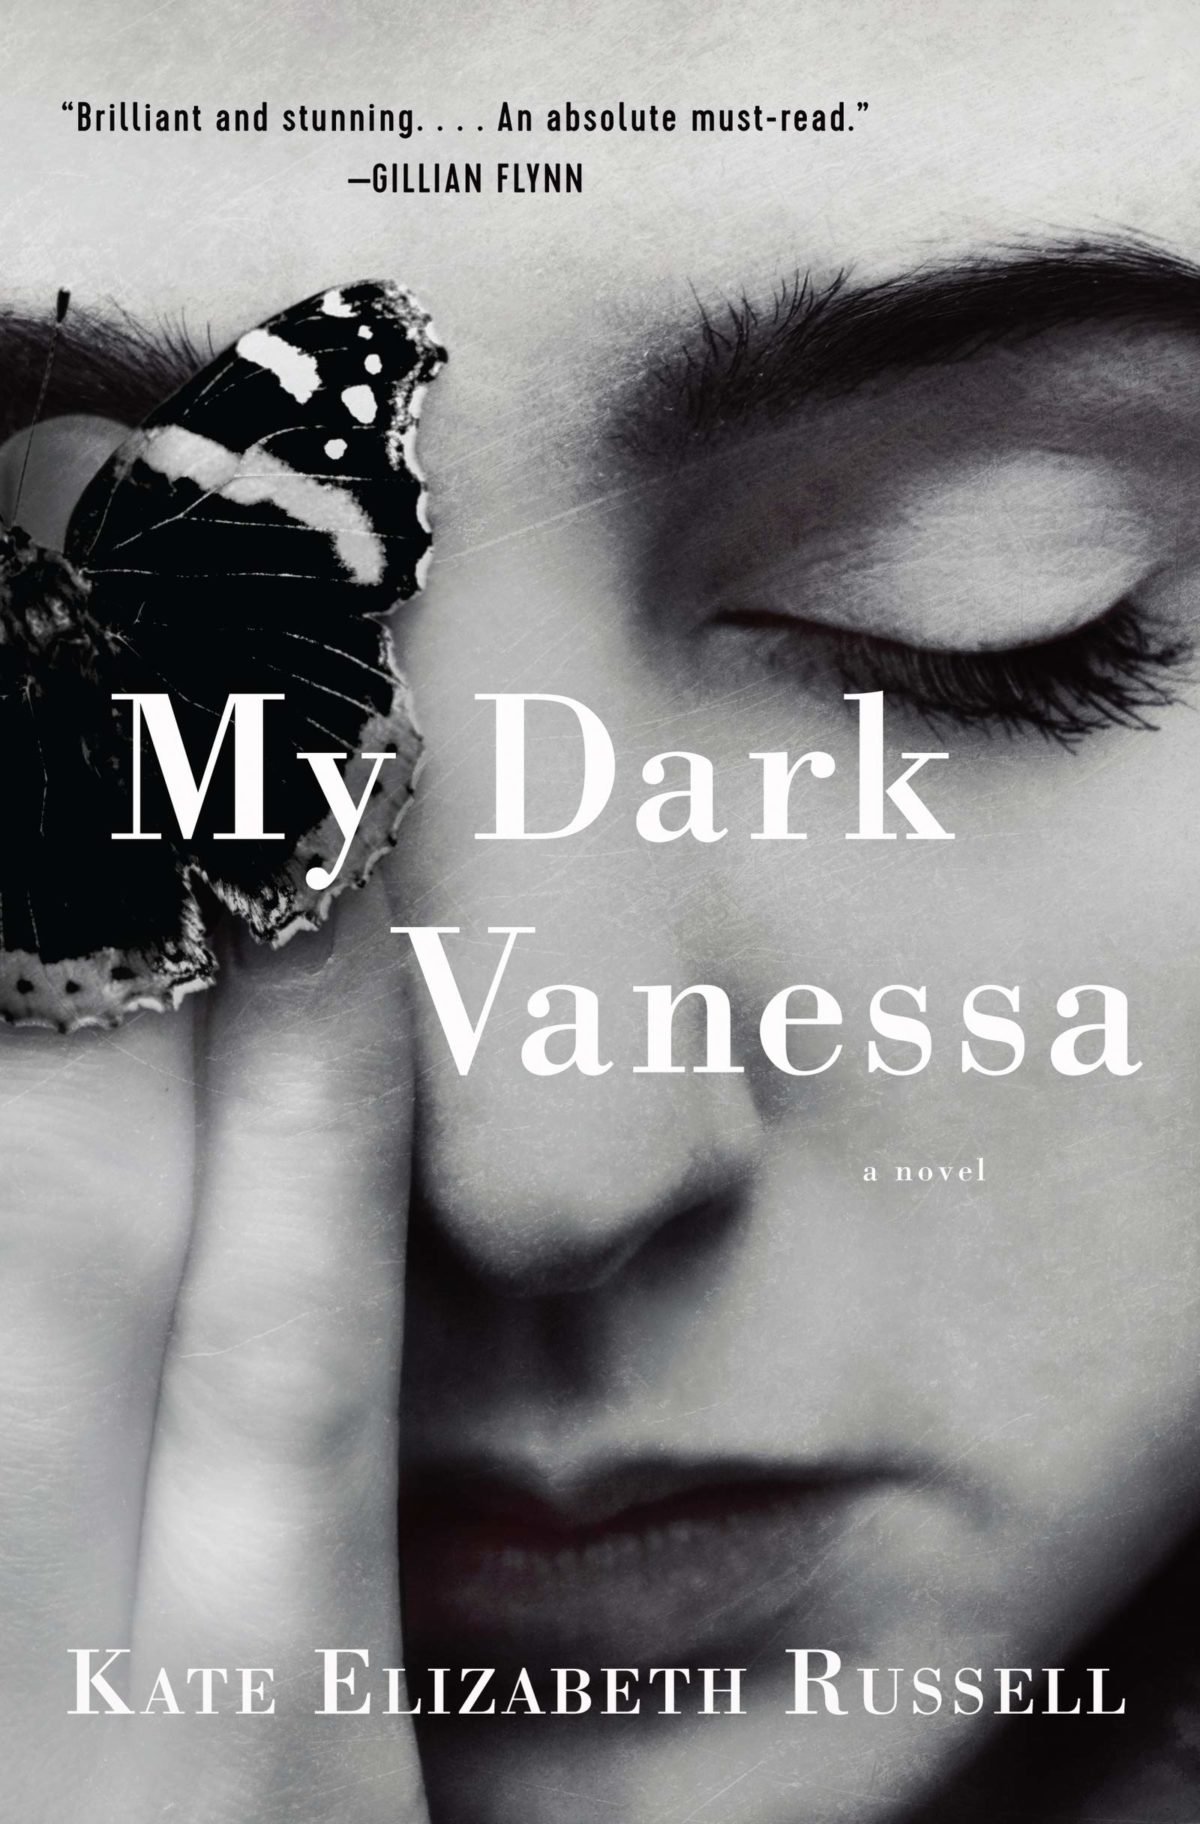 The book cover for My Dark Vanessa feat. a black and white close-up image of a woman's face with one eye covered by a butterfly.